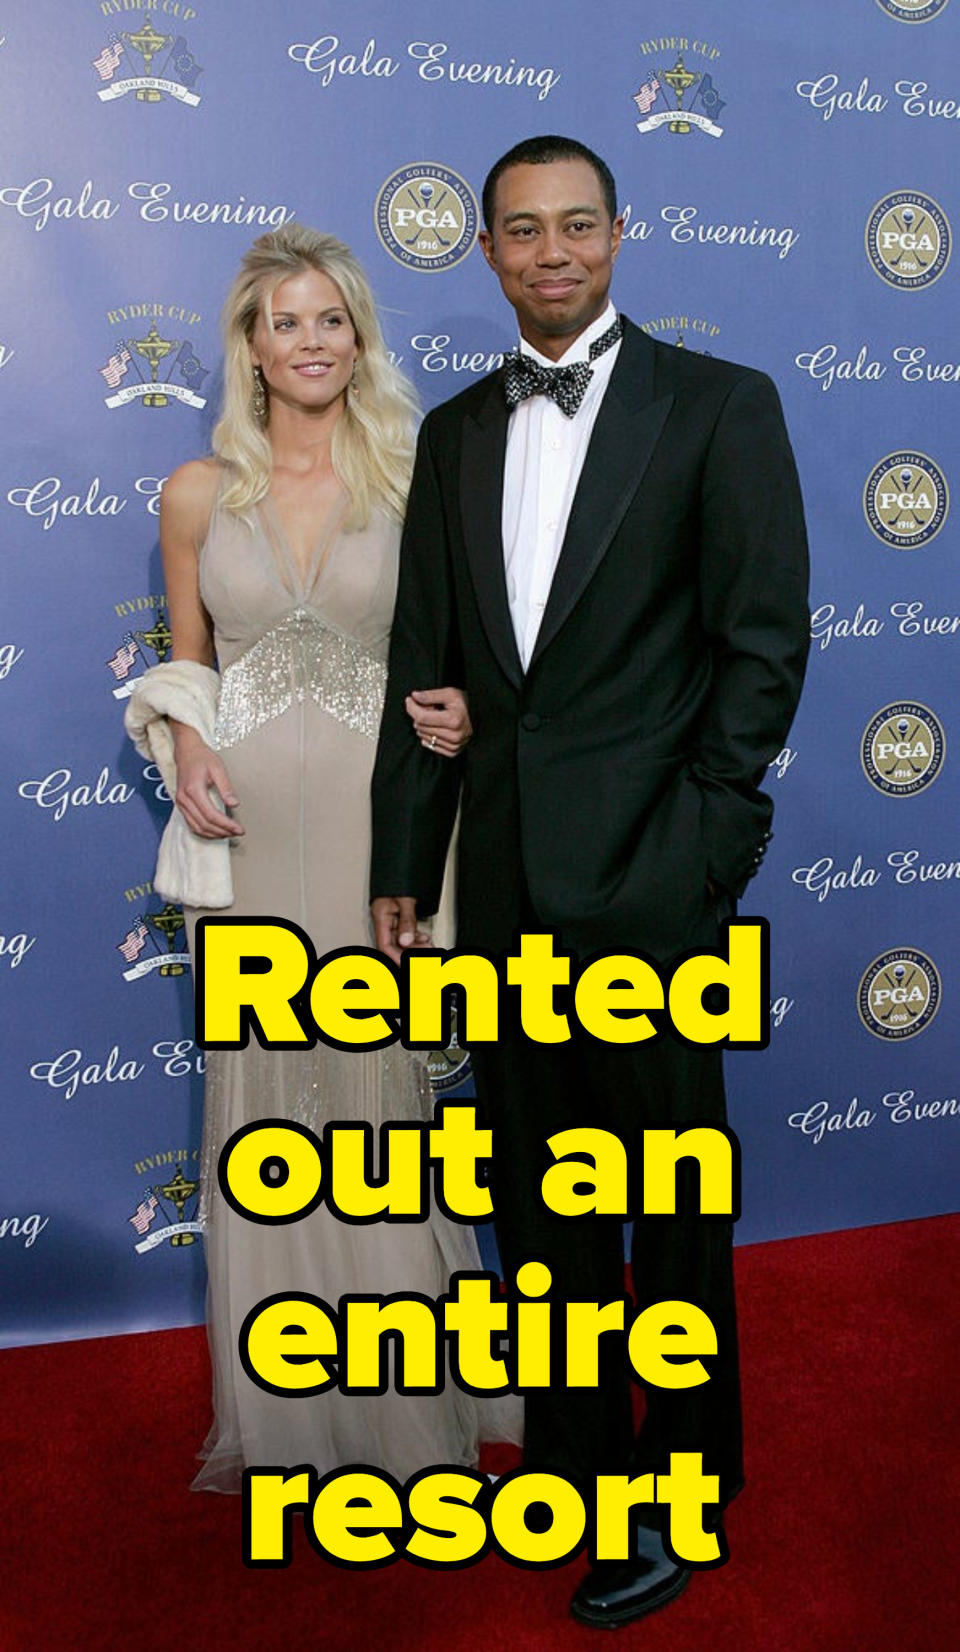 Picture of Tiger Woods and Elin Nordegren on a red carpet labeled "rented out an entire resort"